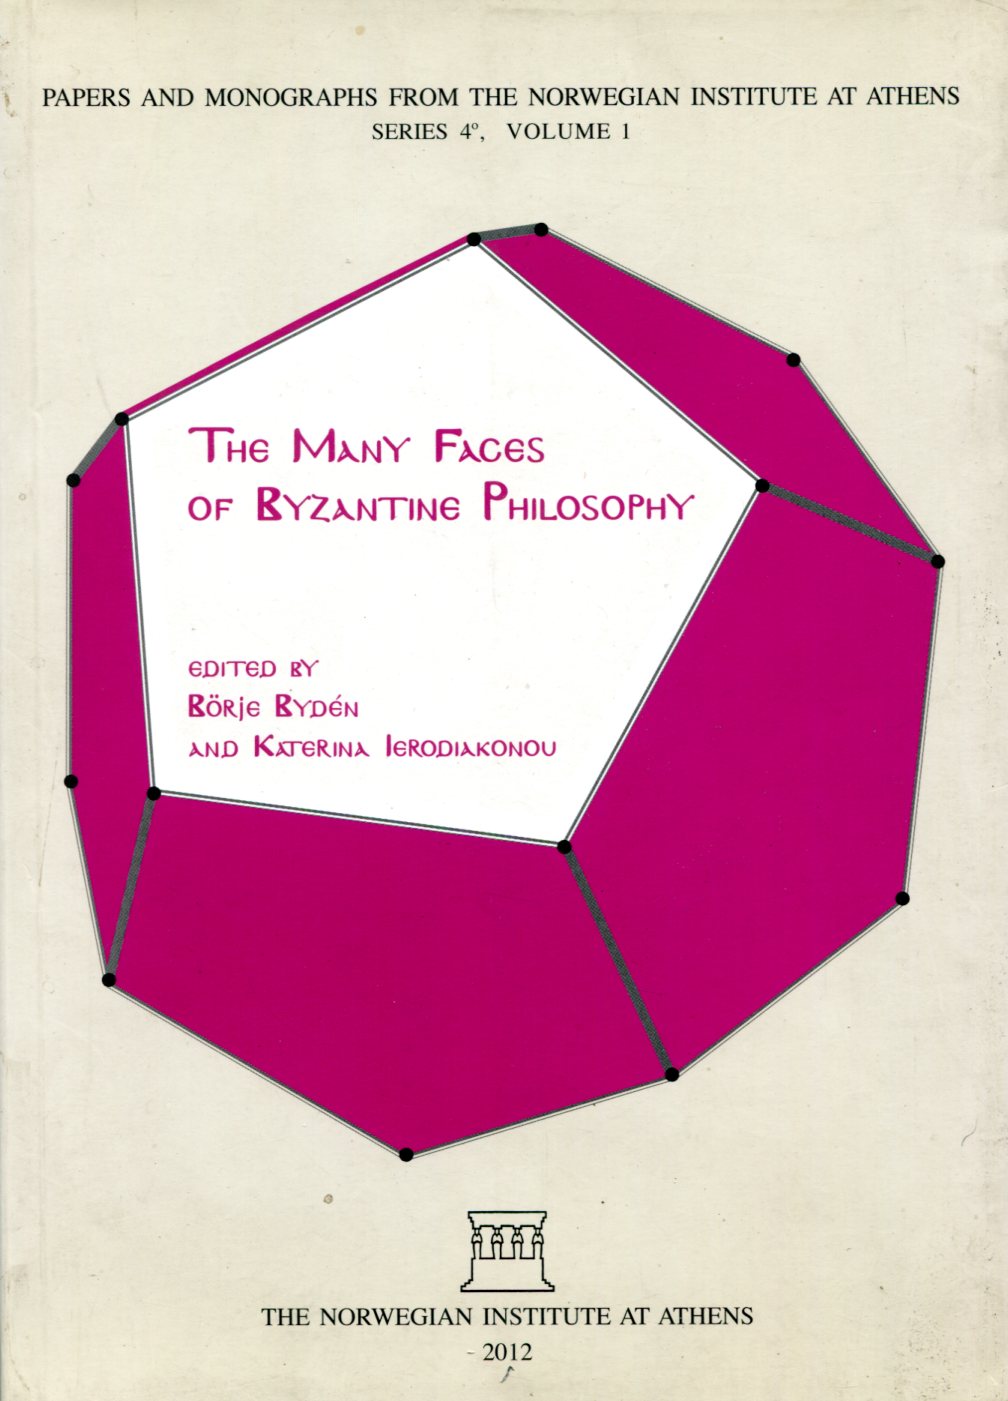 THE MANY FACES OF BYZANTINE PHILOSOPHY